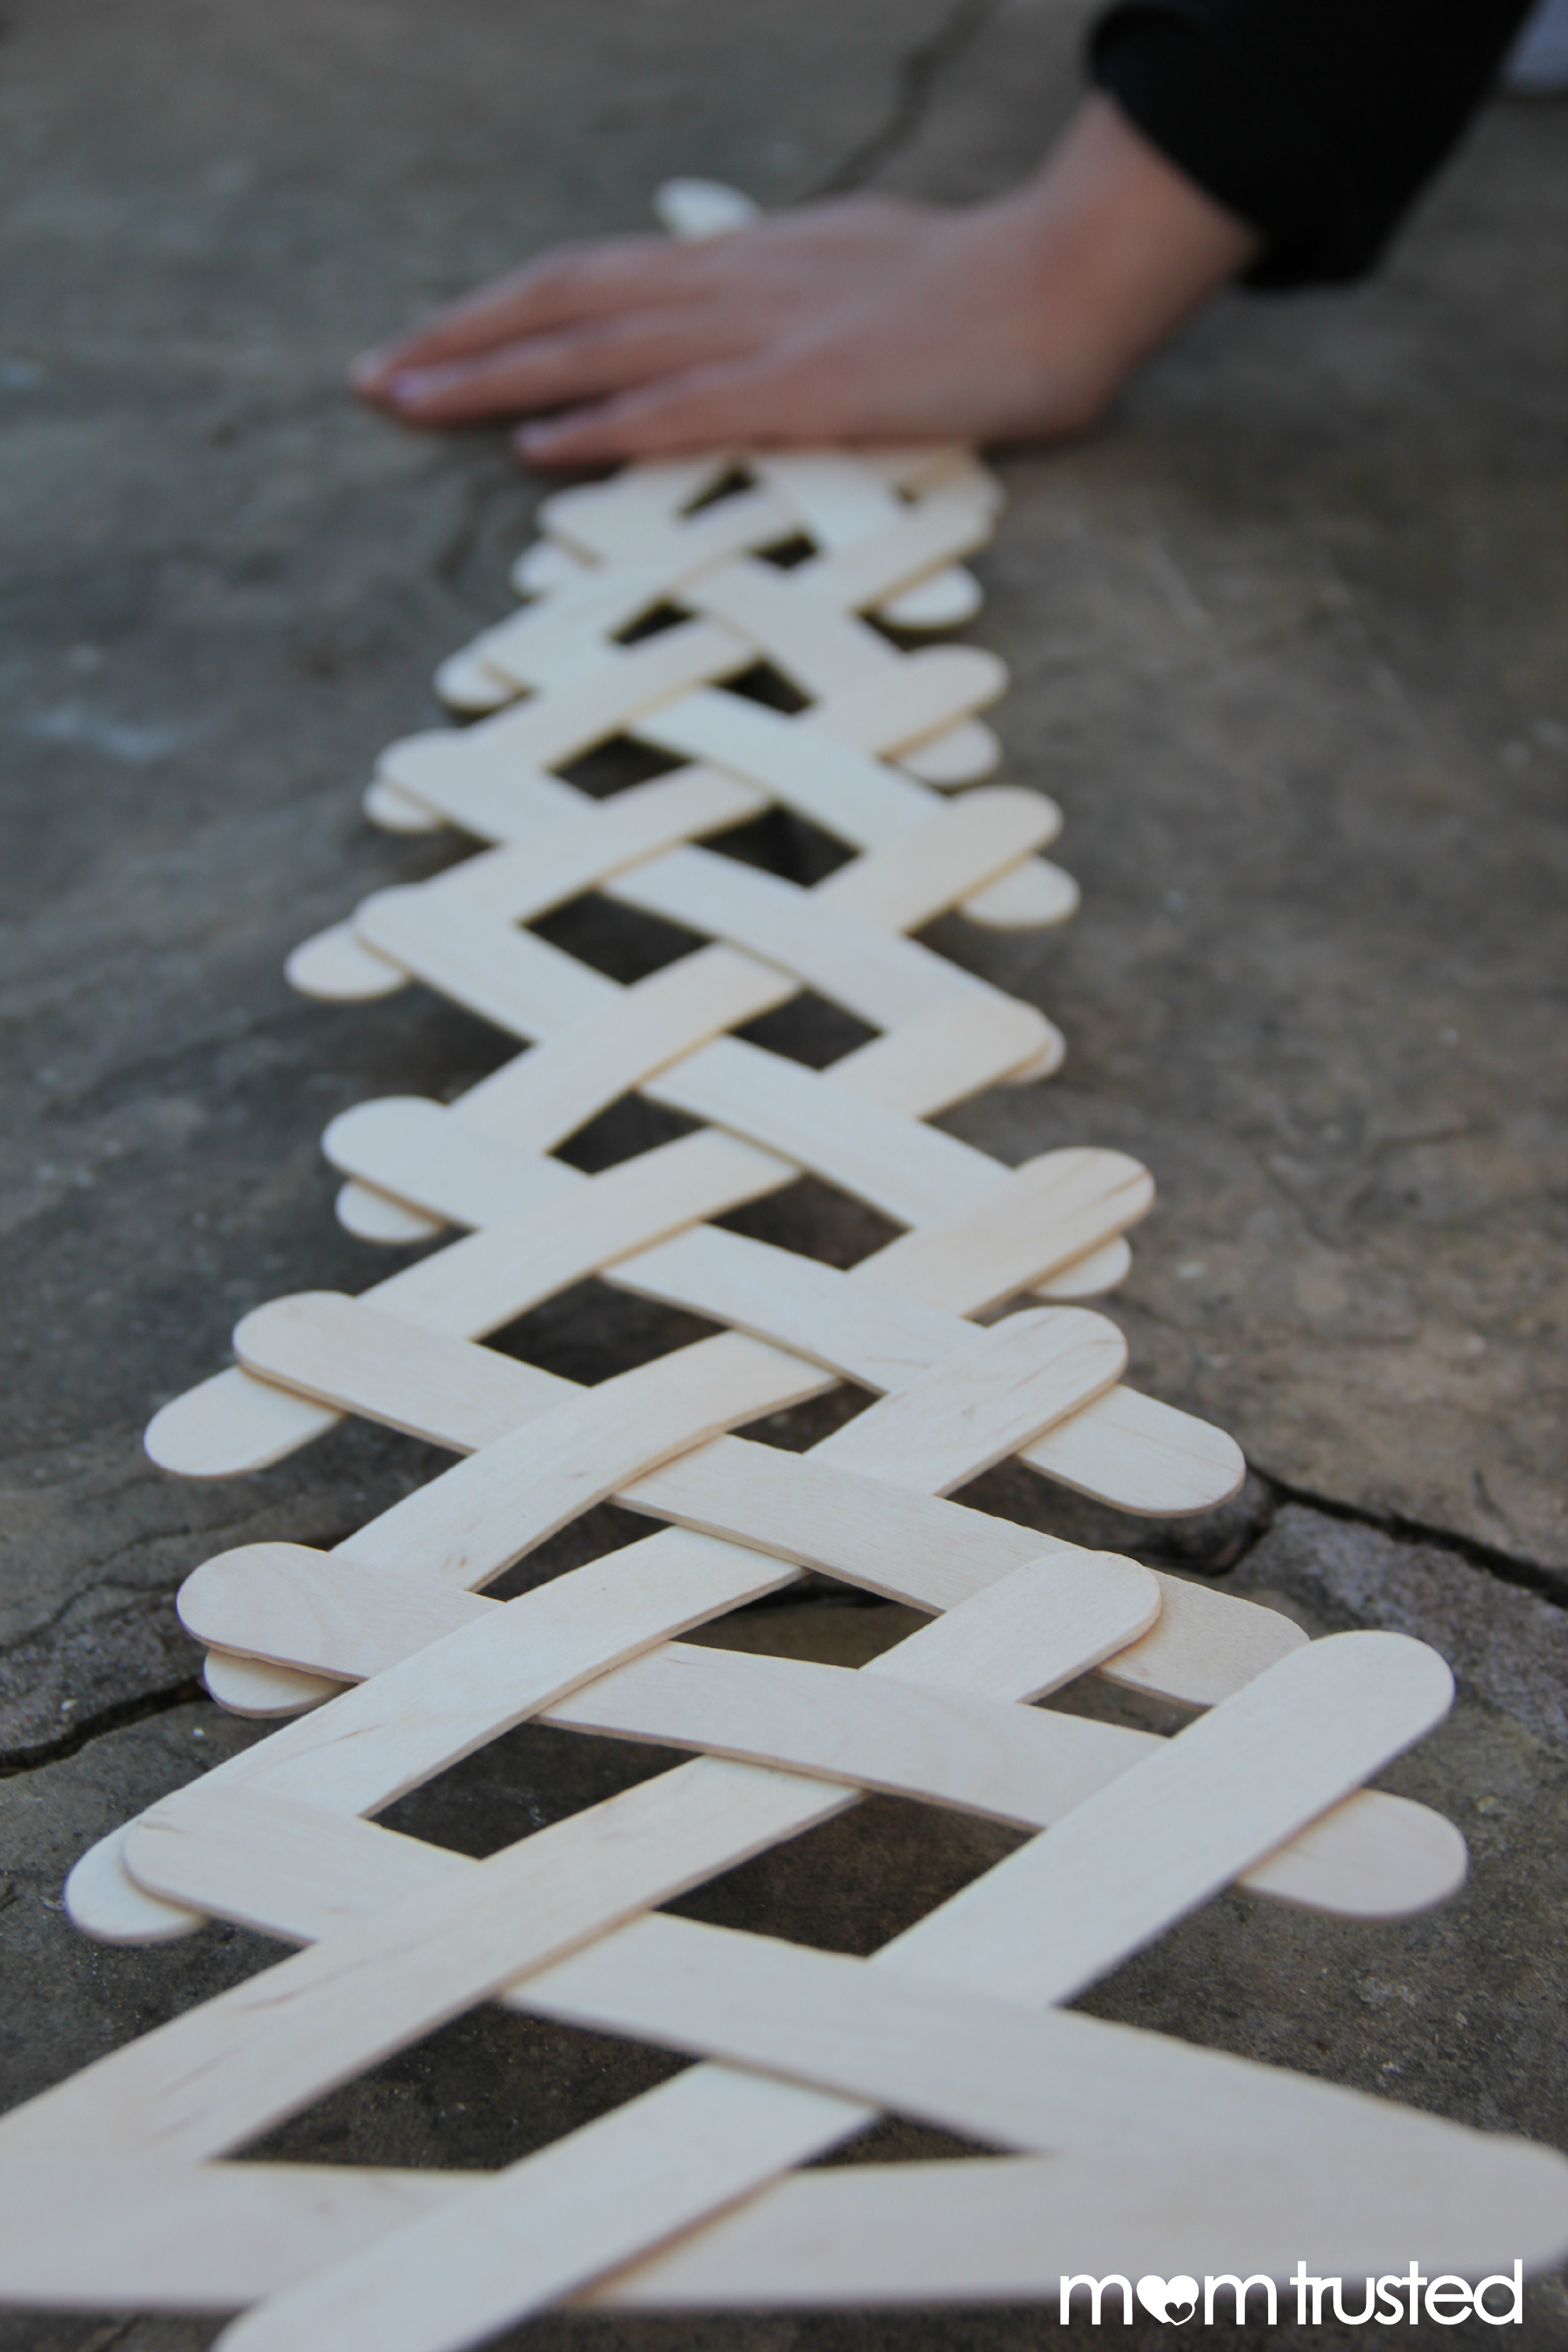 Popsicle Stick Chain Reaction - Preschool Activities and